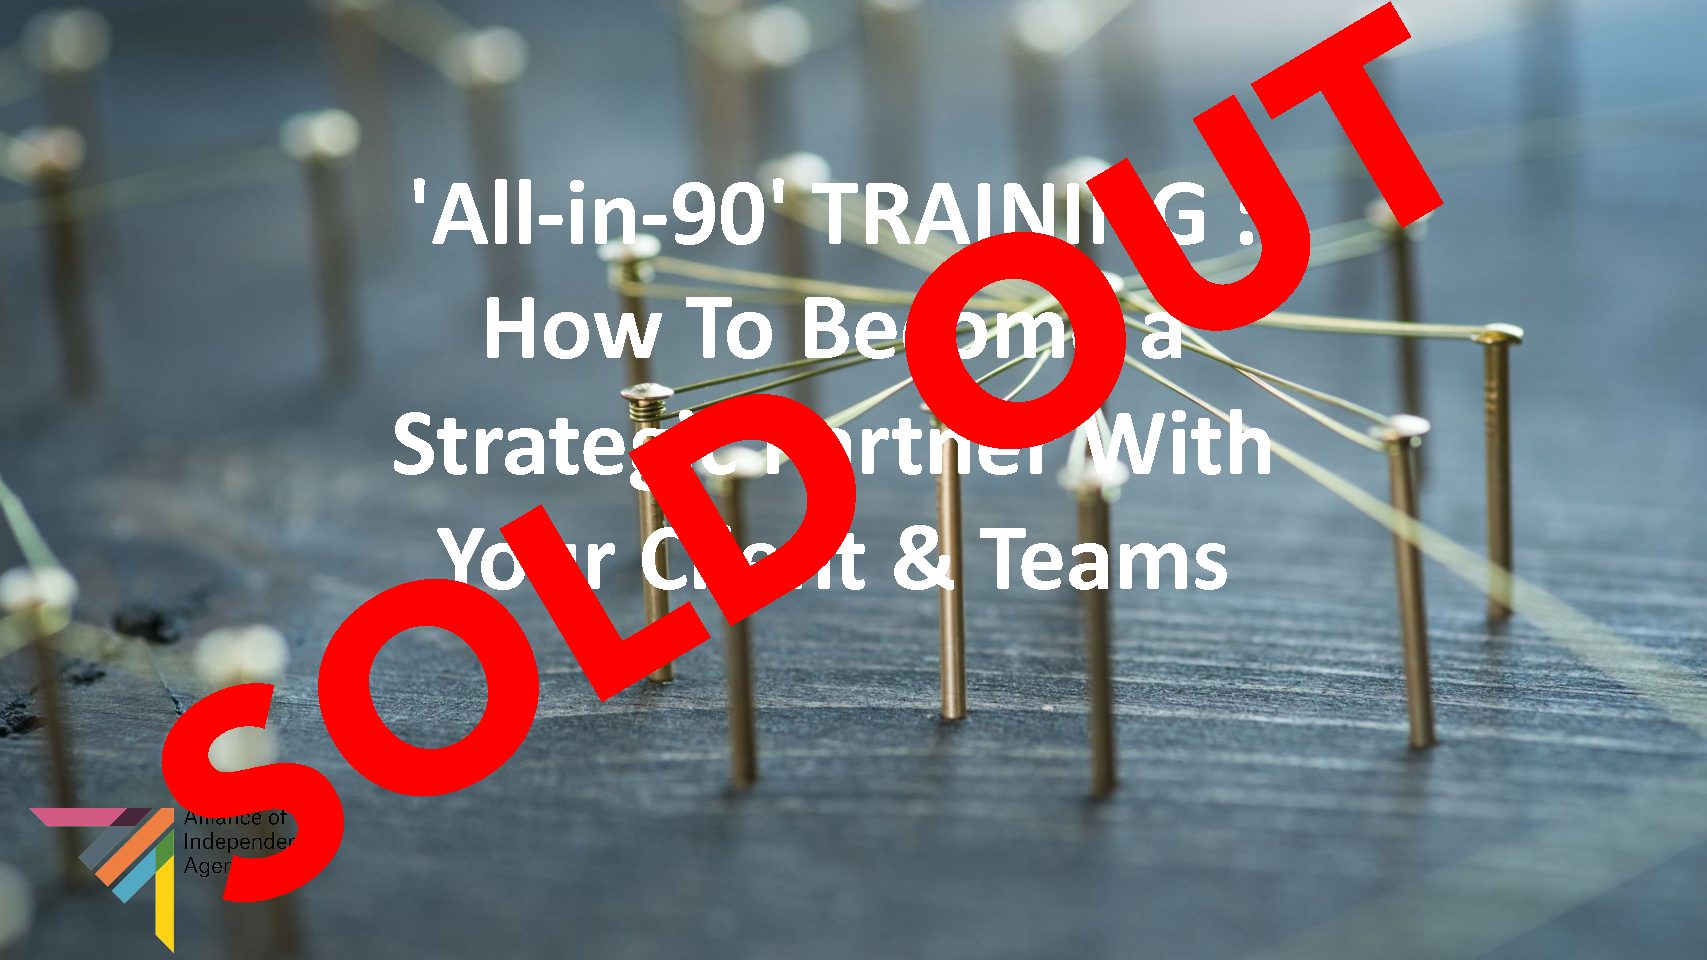 'All-in-90' TRAINING : How To Become a Strategic Partner With Your Client & Teams